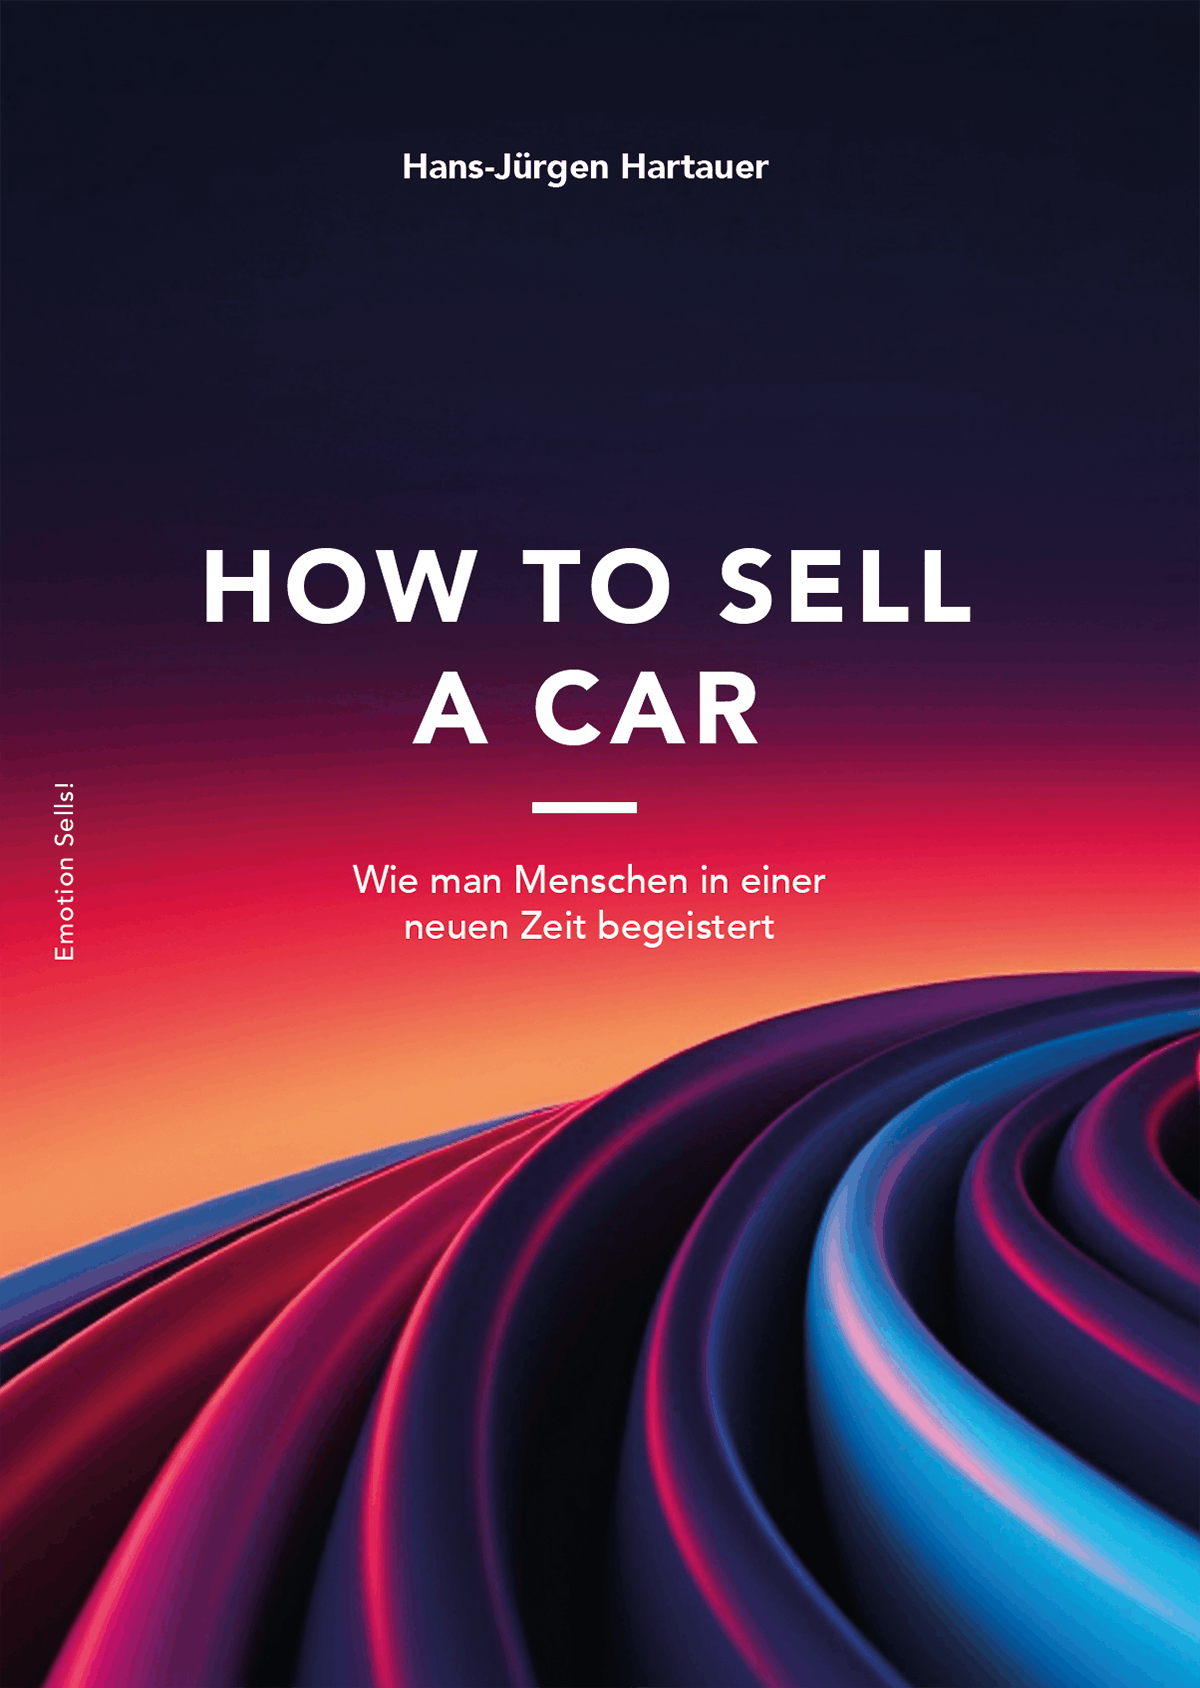 Autohaus How to sell a car Future Service Sells Consulting